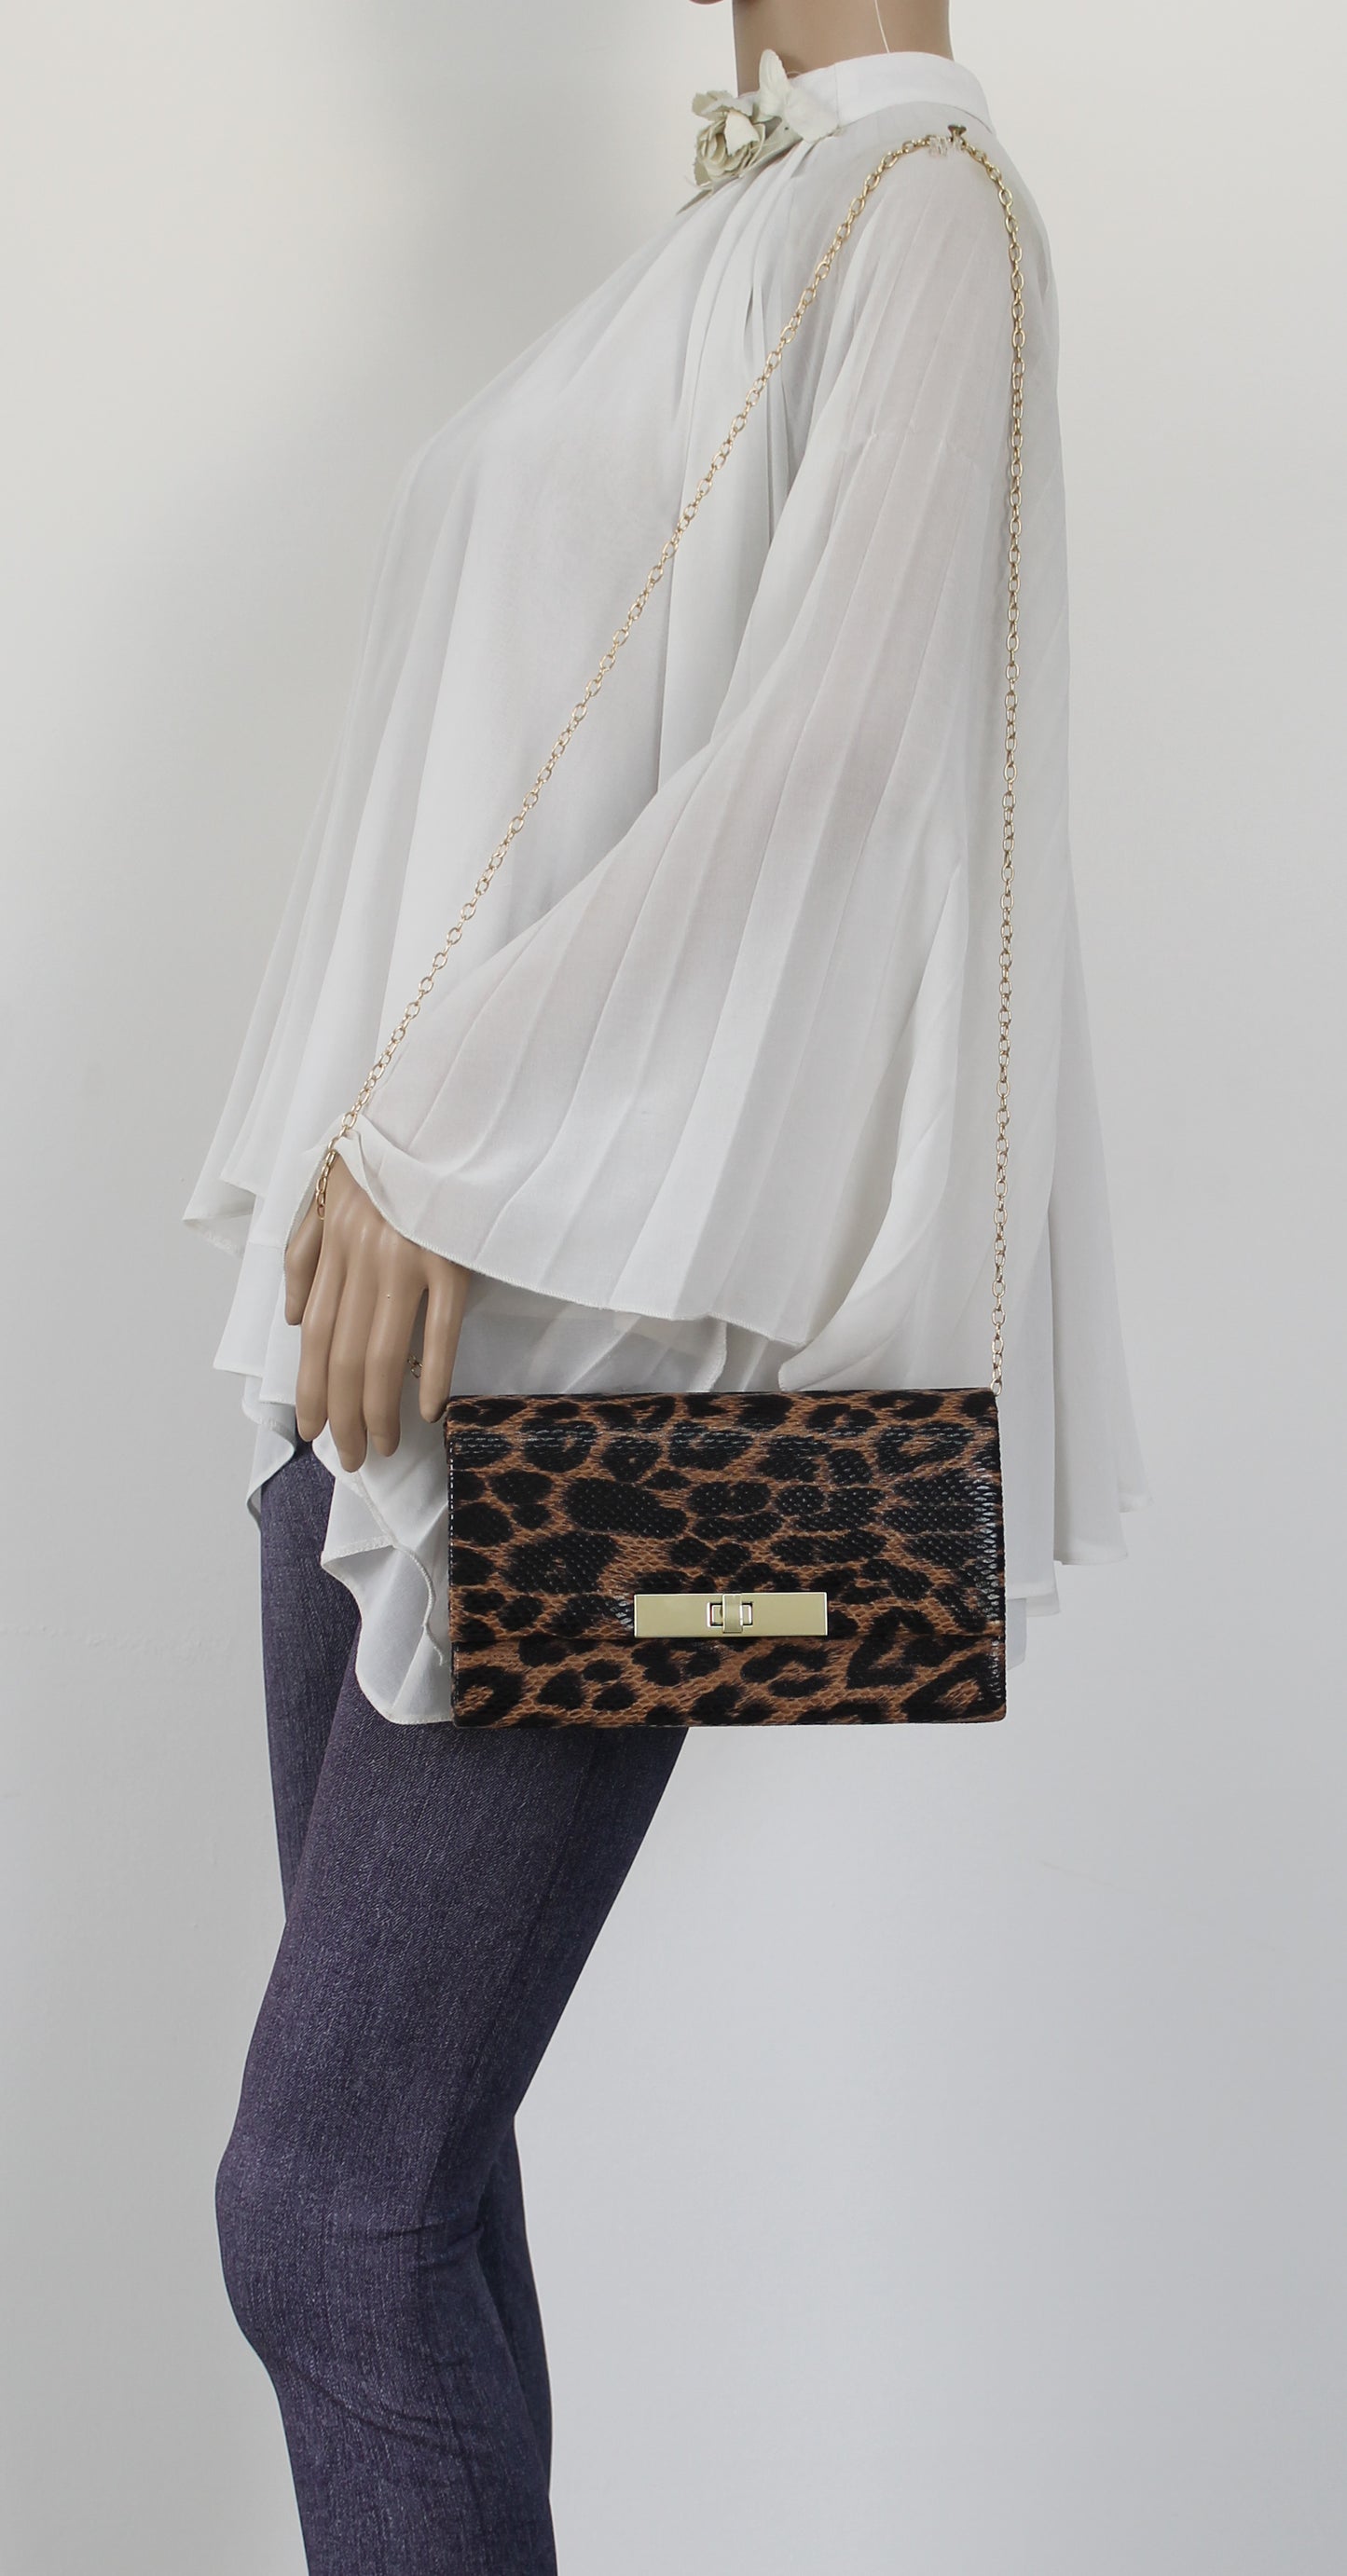 Tana Faux Leather Animal Style Clutch Bag Leopard Print